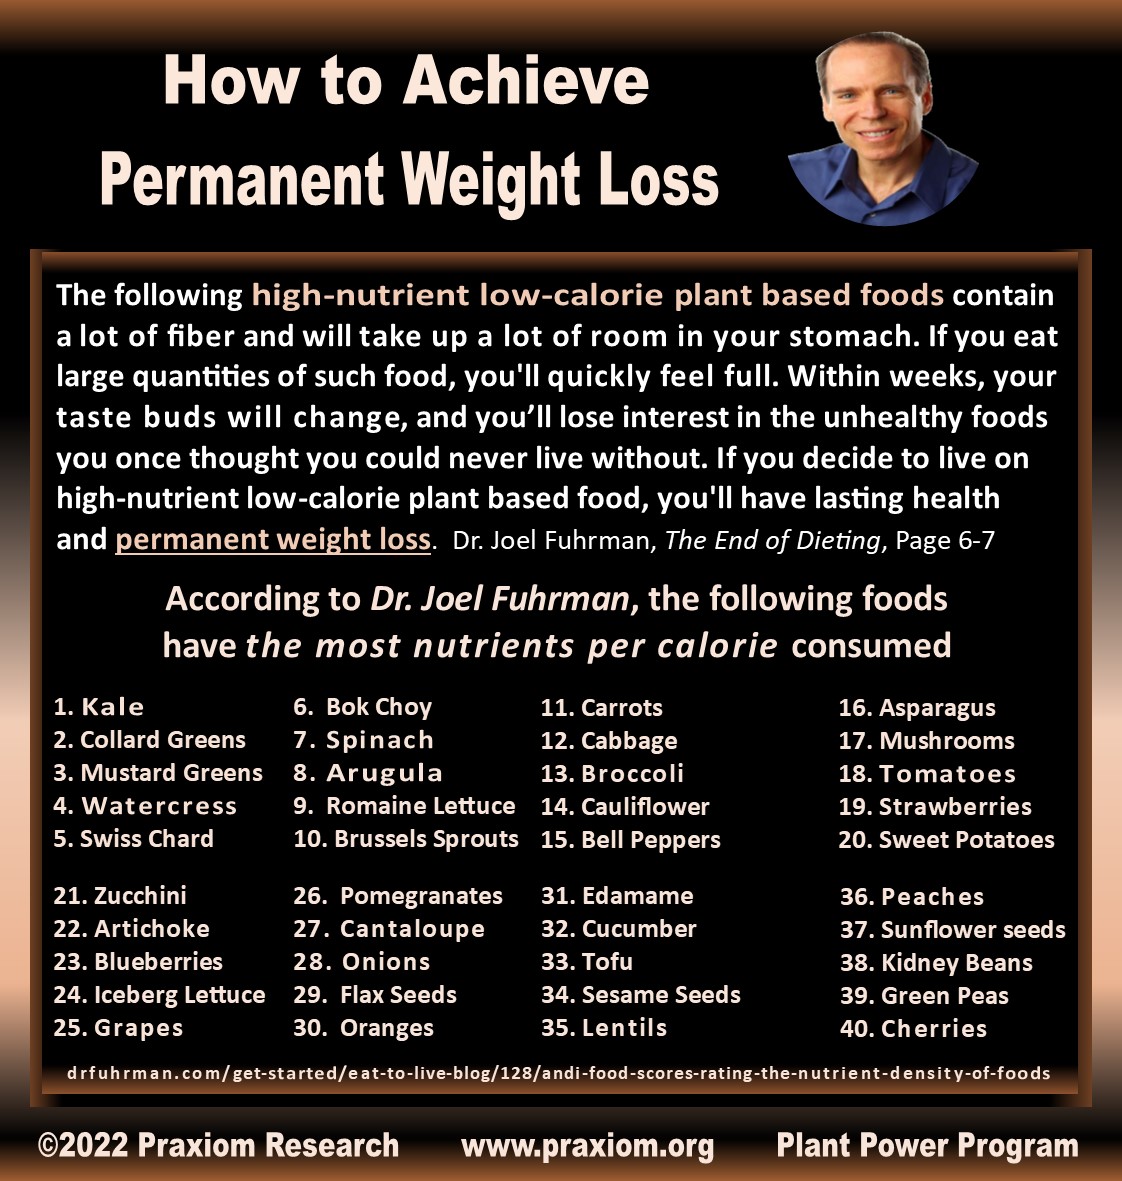 How to Achieve Permanent Weight Loss